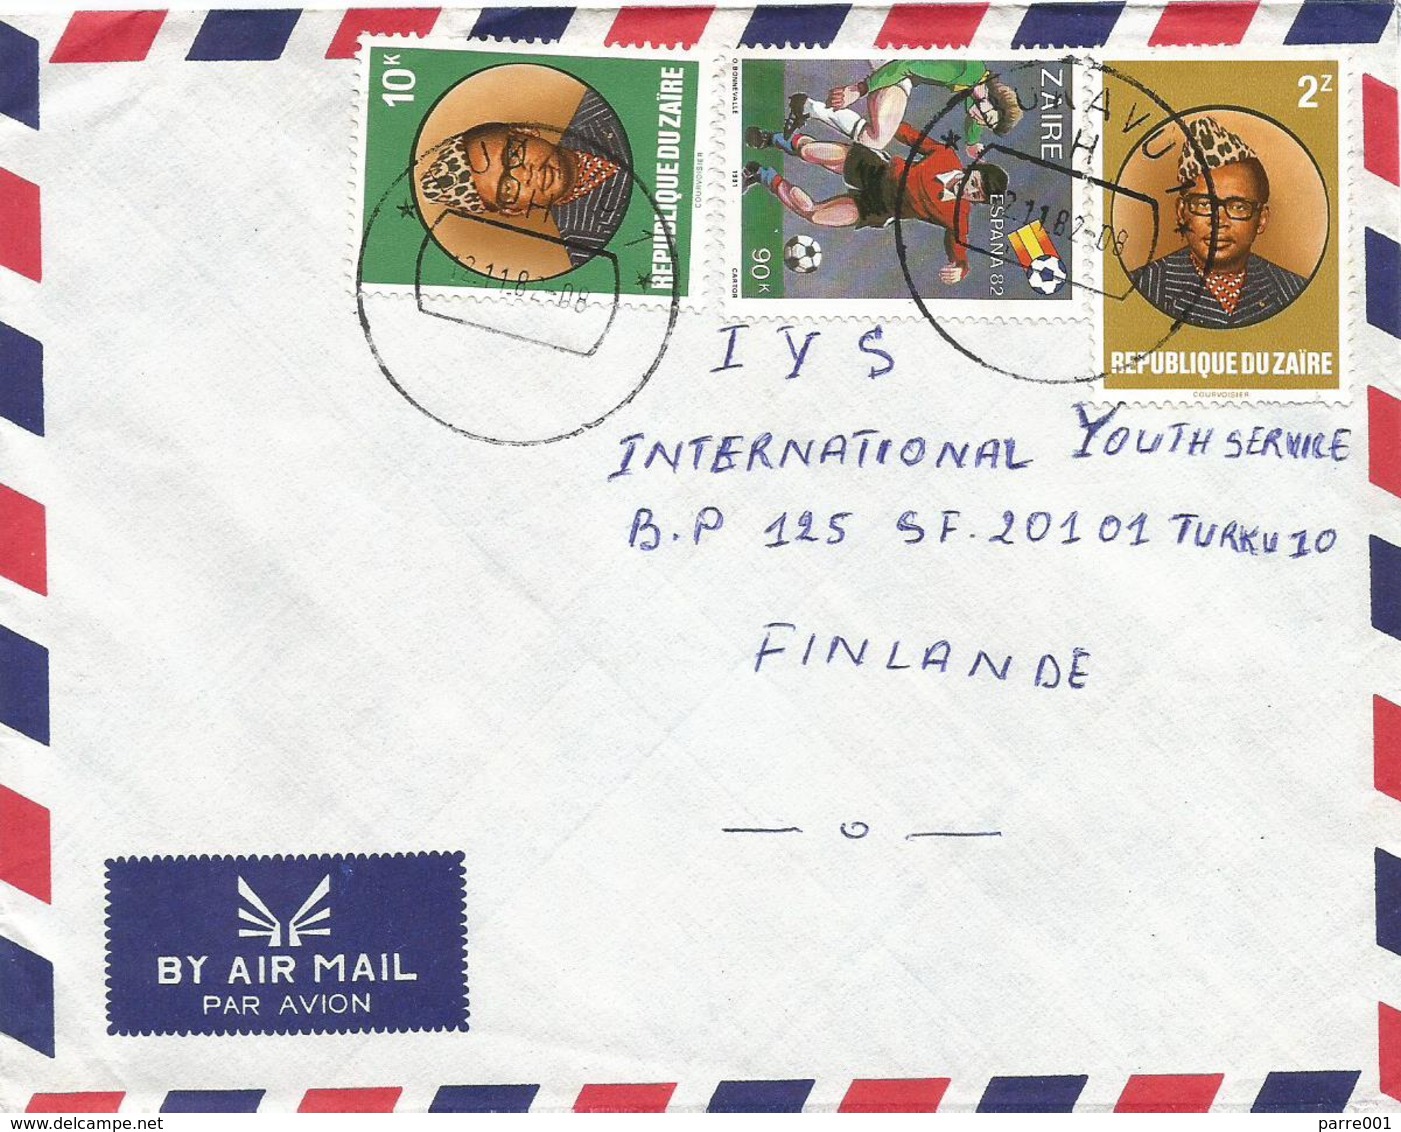 DRC RDC Zaire Congo 1982 Bukavu Code Letter H World Cup Football Spain 90k President Mobuto 10k 2Z Cover - Used Stamps